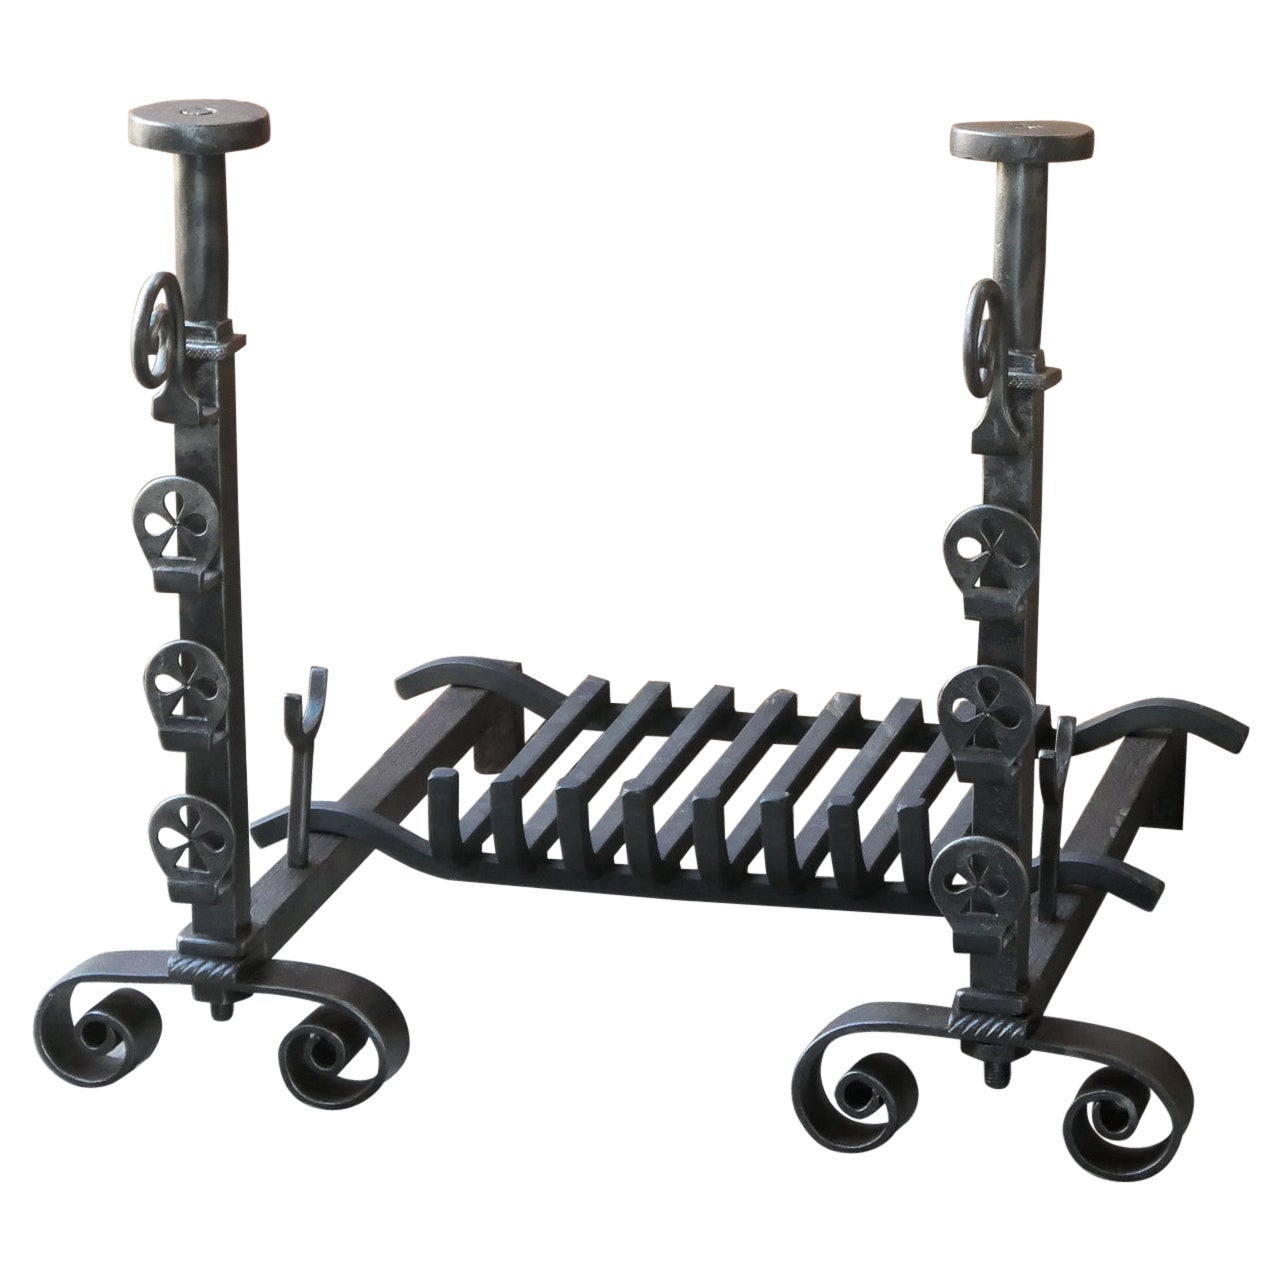 French Neoclassical  Period Fireplace Grate or Fire Basket, 18th - 19th Century For Sale